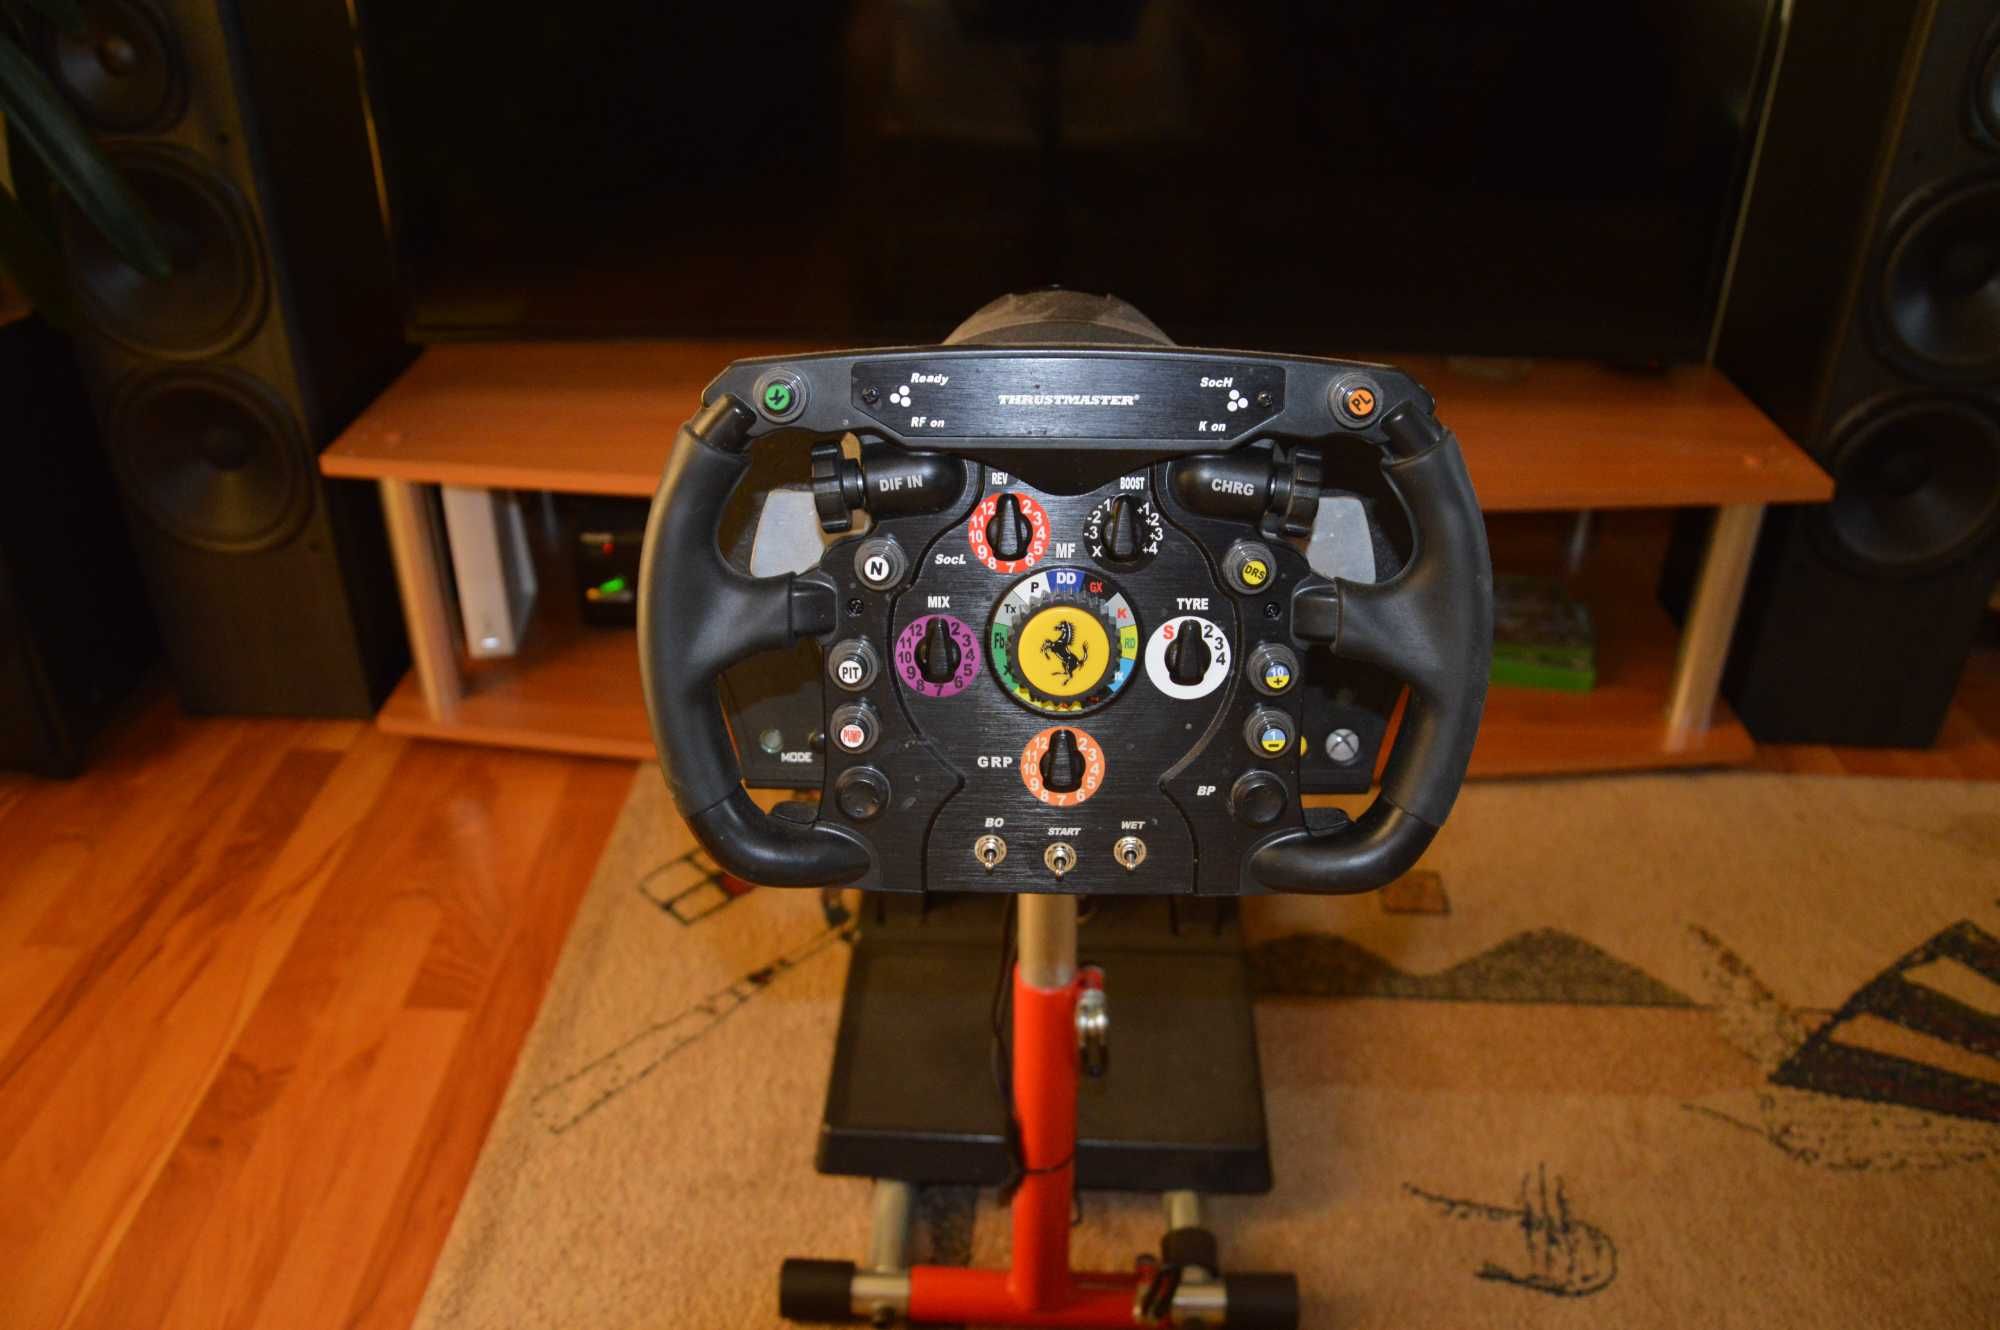 Kierownica Thrustmaster TX , F1 Wheel, 5 Gier, Statyw Stand Pro